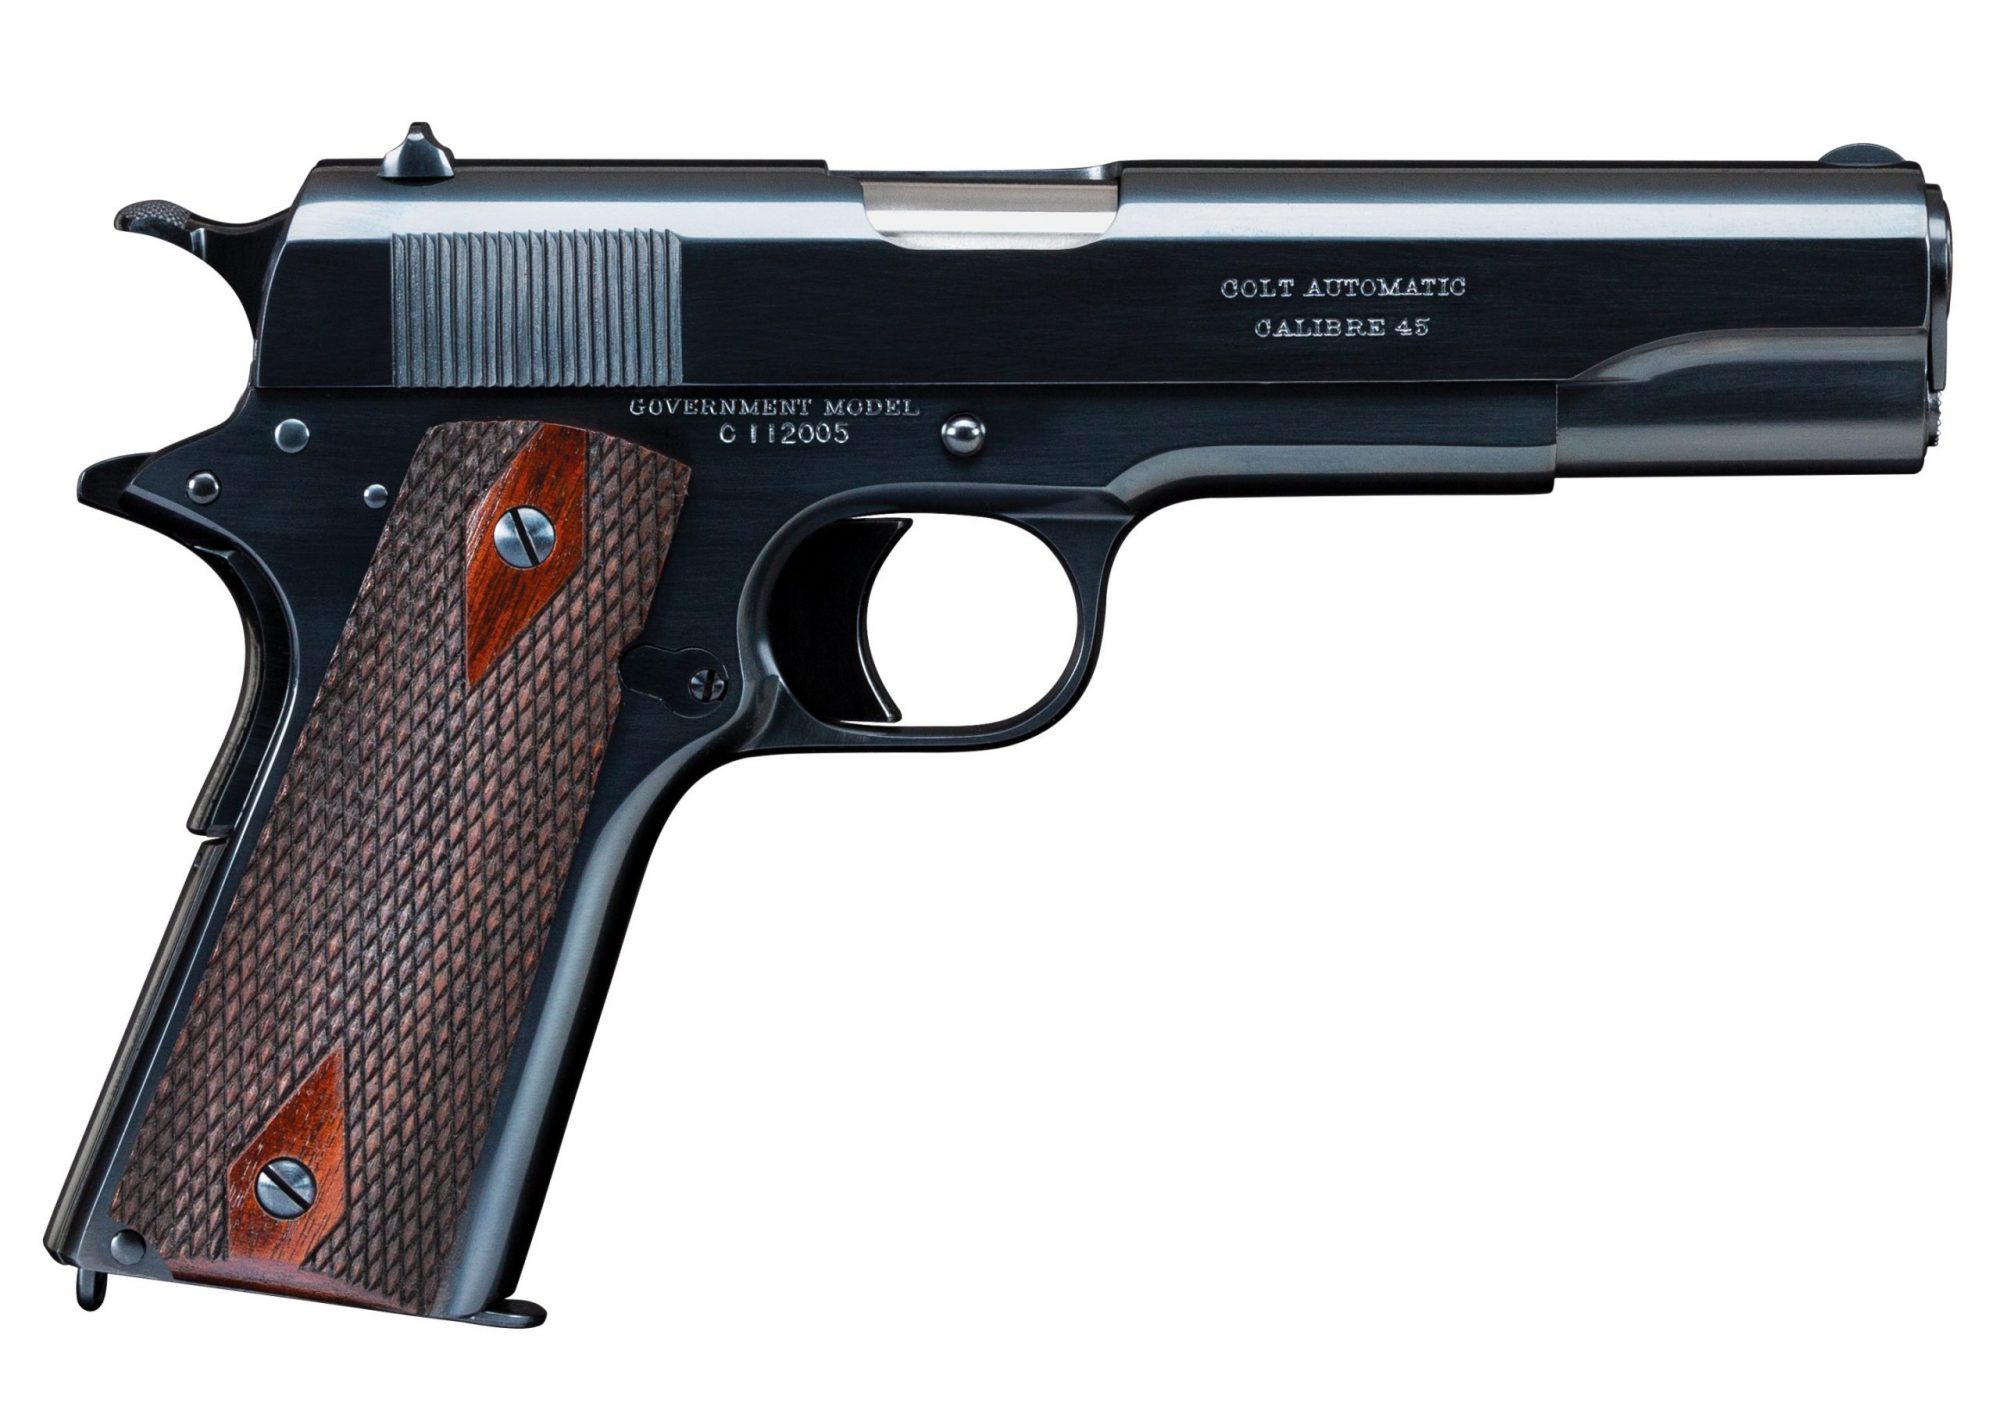 Photo of a Colt Government Model 1911 Commercial, restored by Turnbull Restoration and featuring all period-correct finishes including charcoal bluing